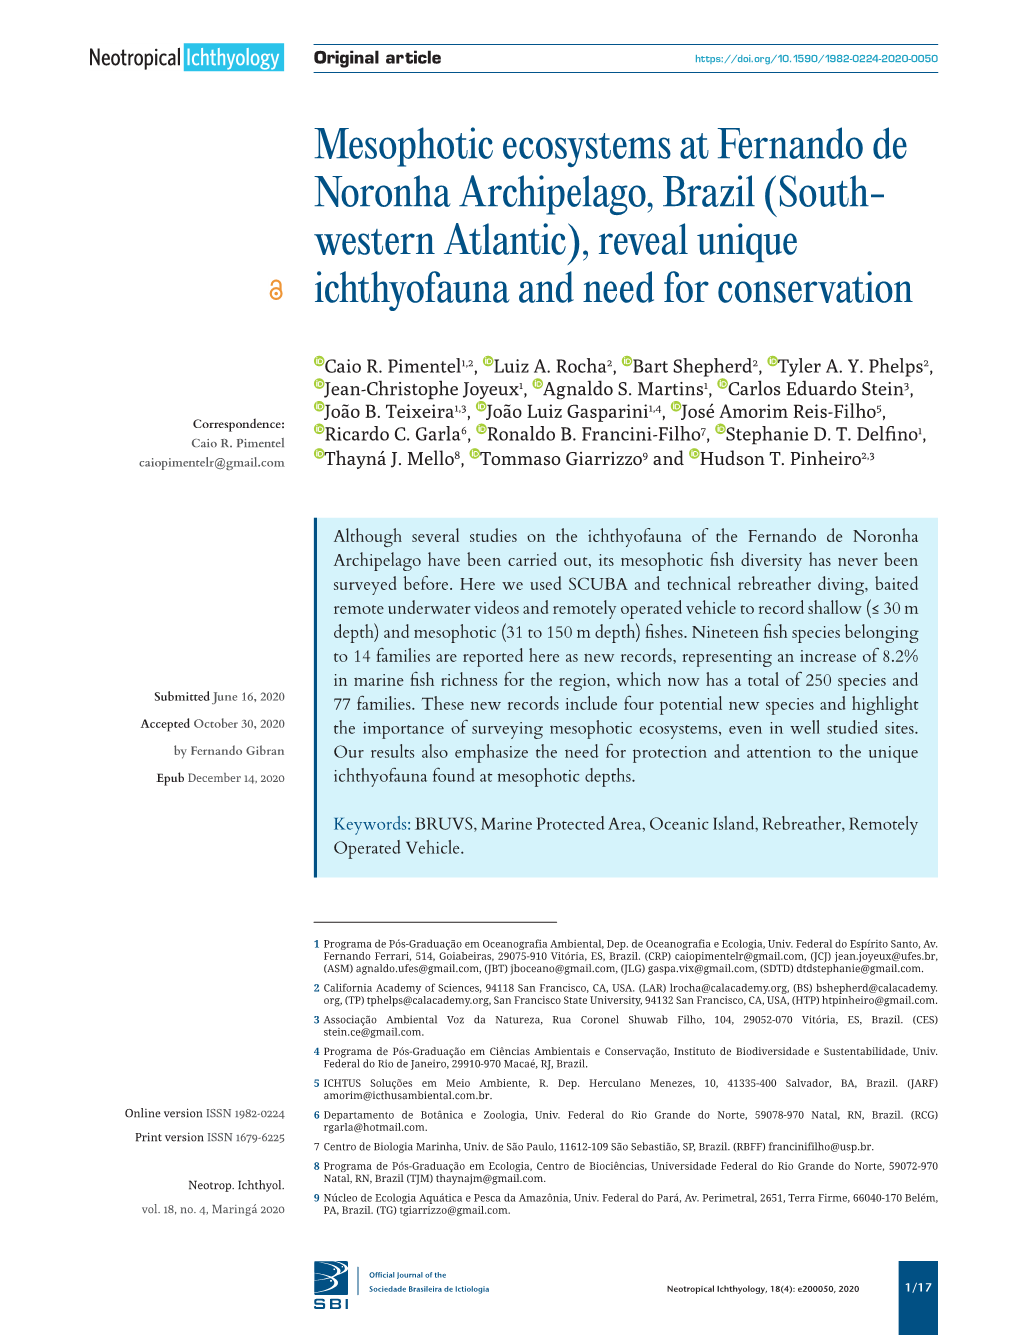 Mesophotic Ecosystems at Fernando De Noronha Archipelago, Brazil (South- Western Atlantic), Reveal Unique Ichthyofauna and Need for Conservation